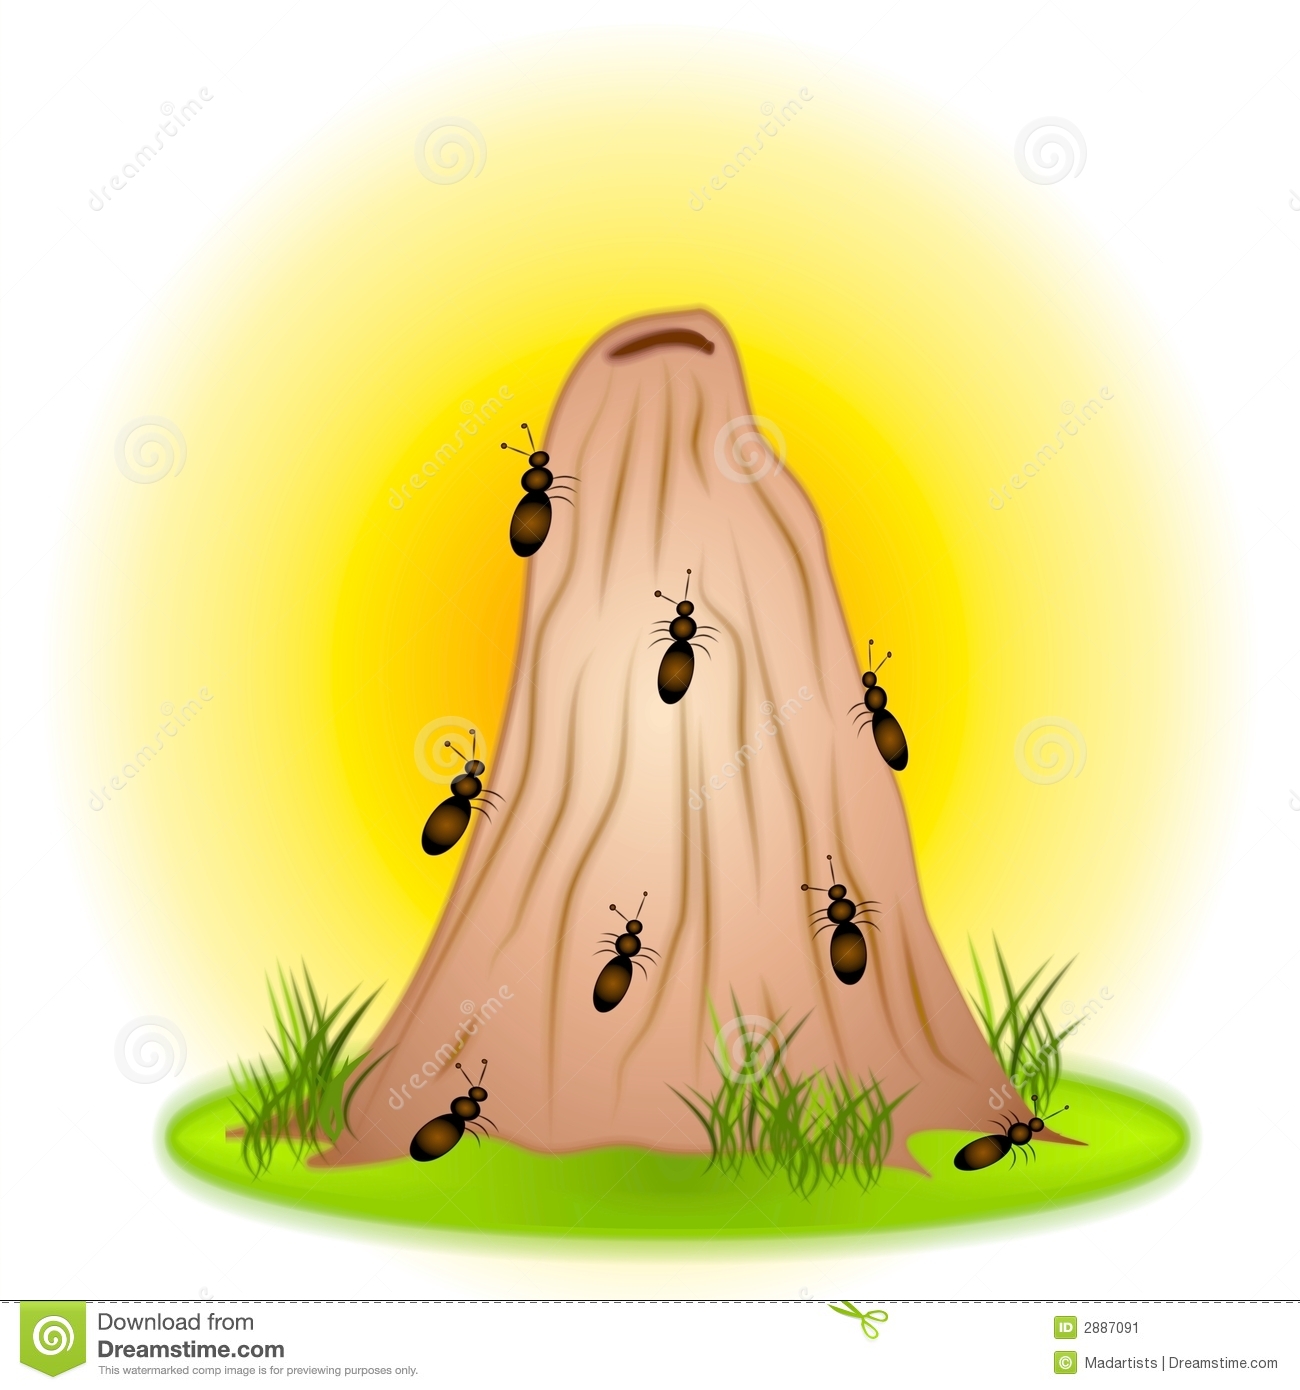 Clip Art Illustration Of A Bunch Of Ants On An Anthill With Grass